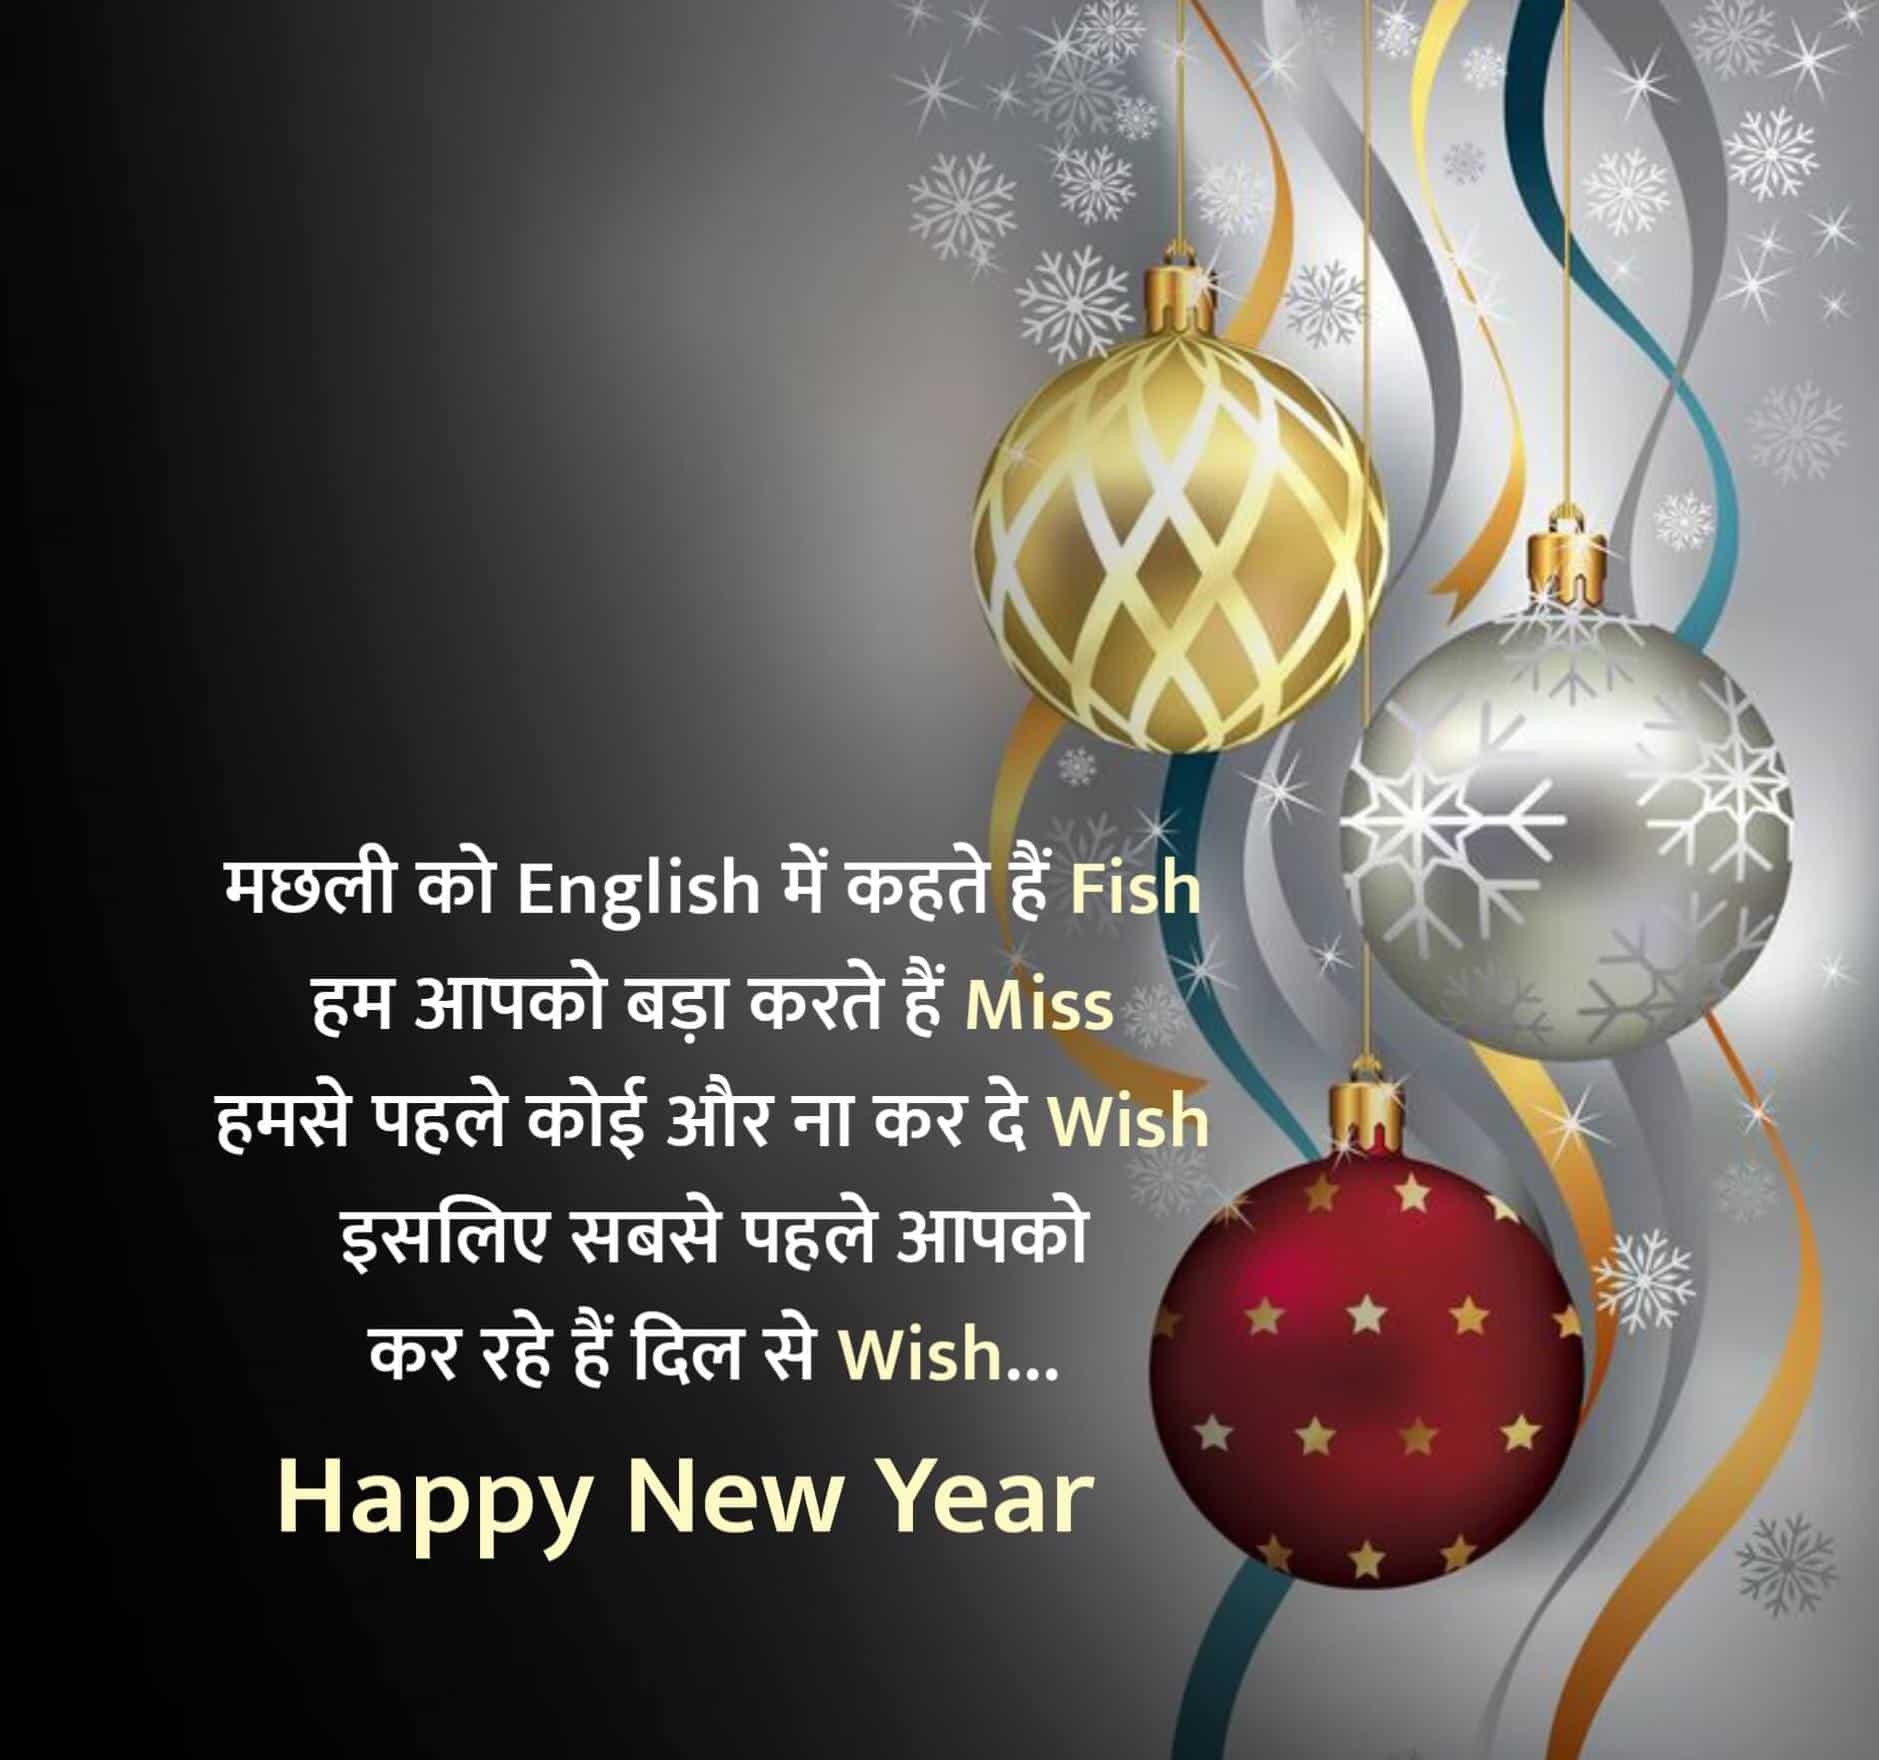 Happy New Year Images HD